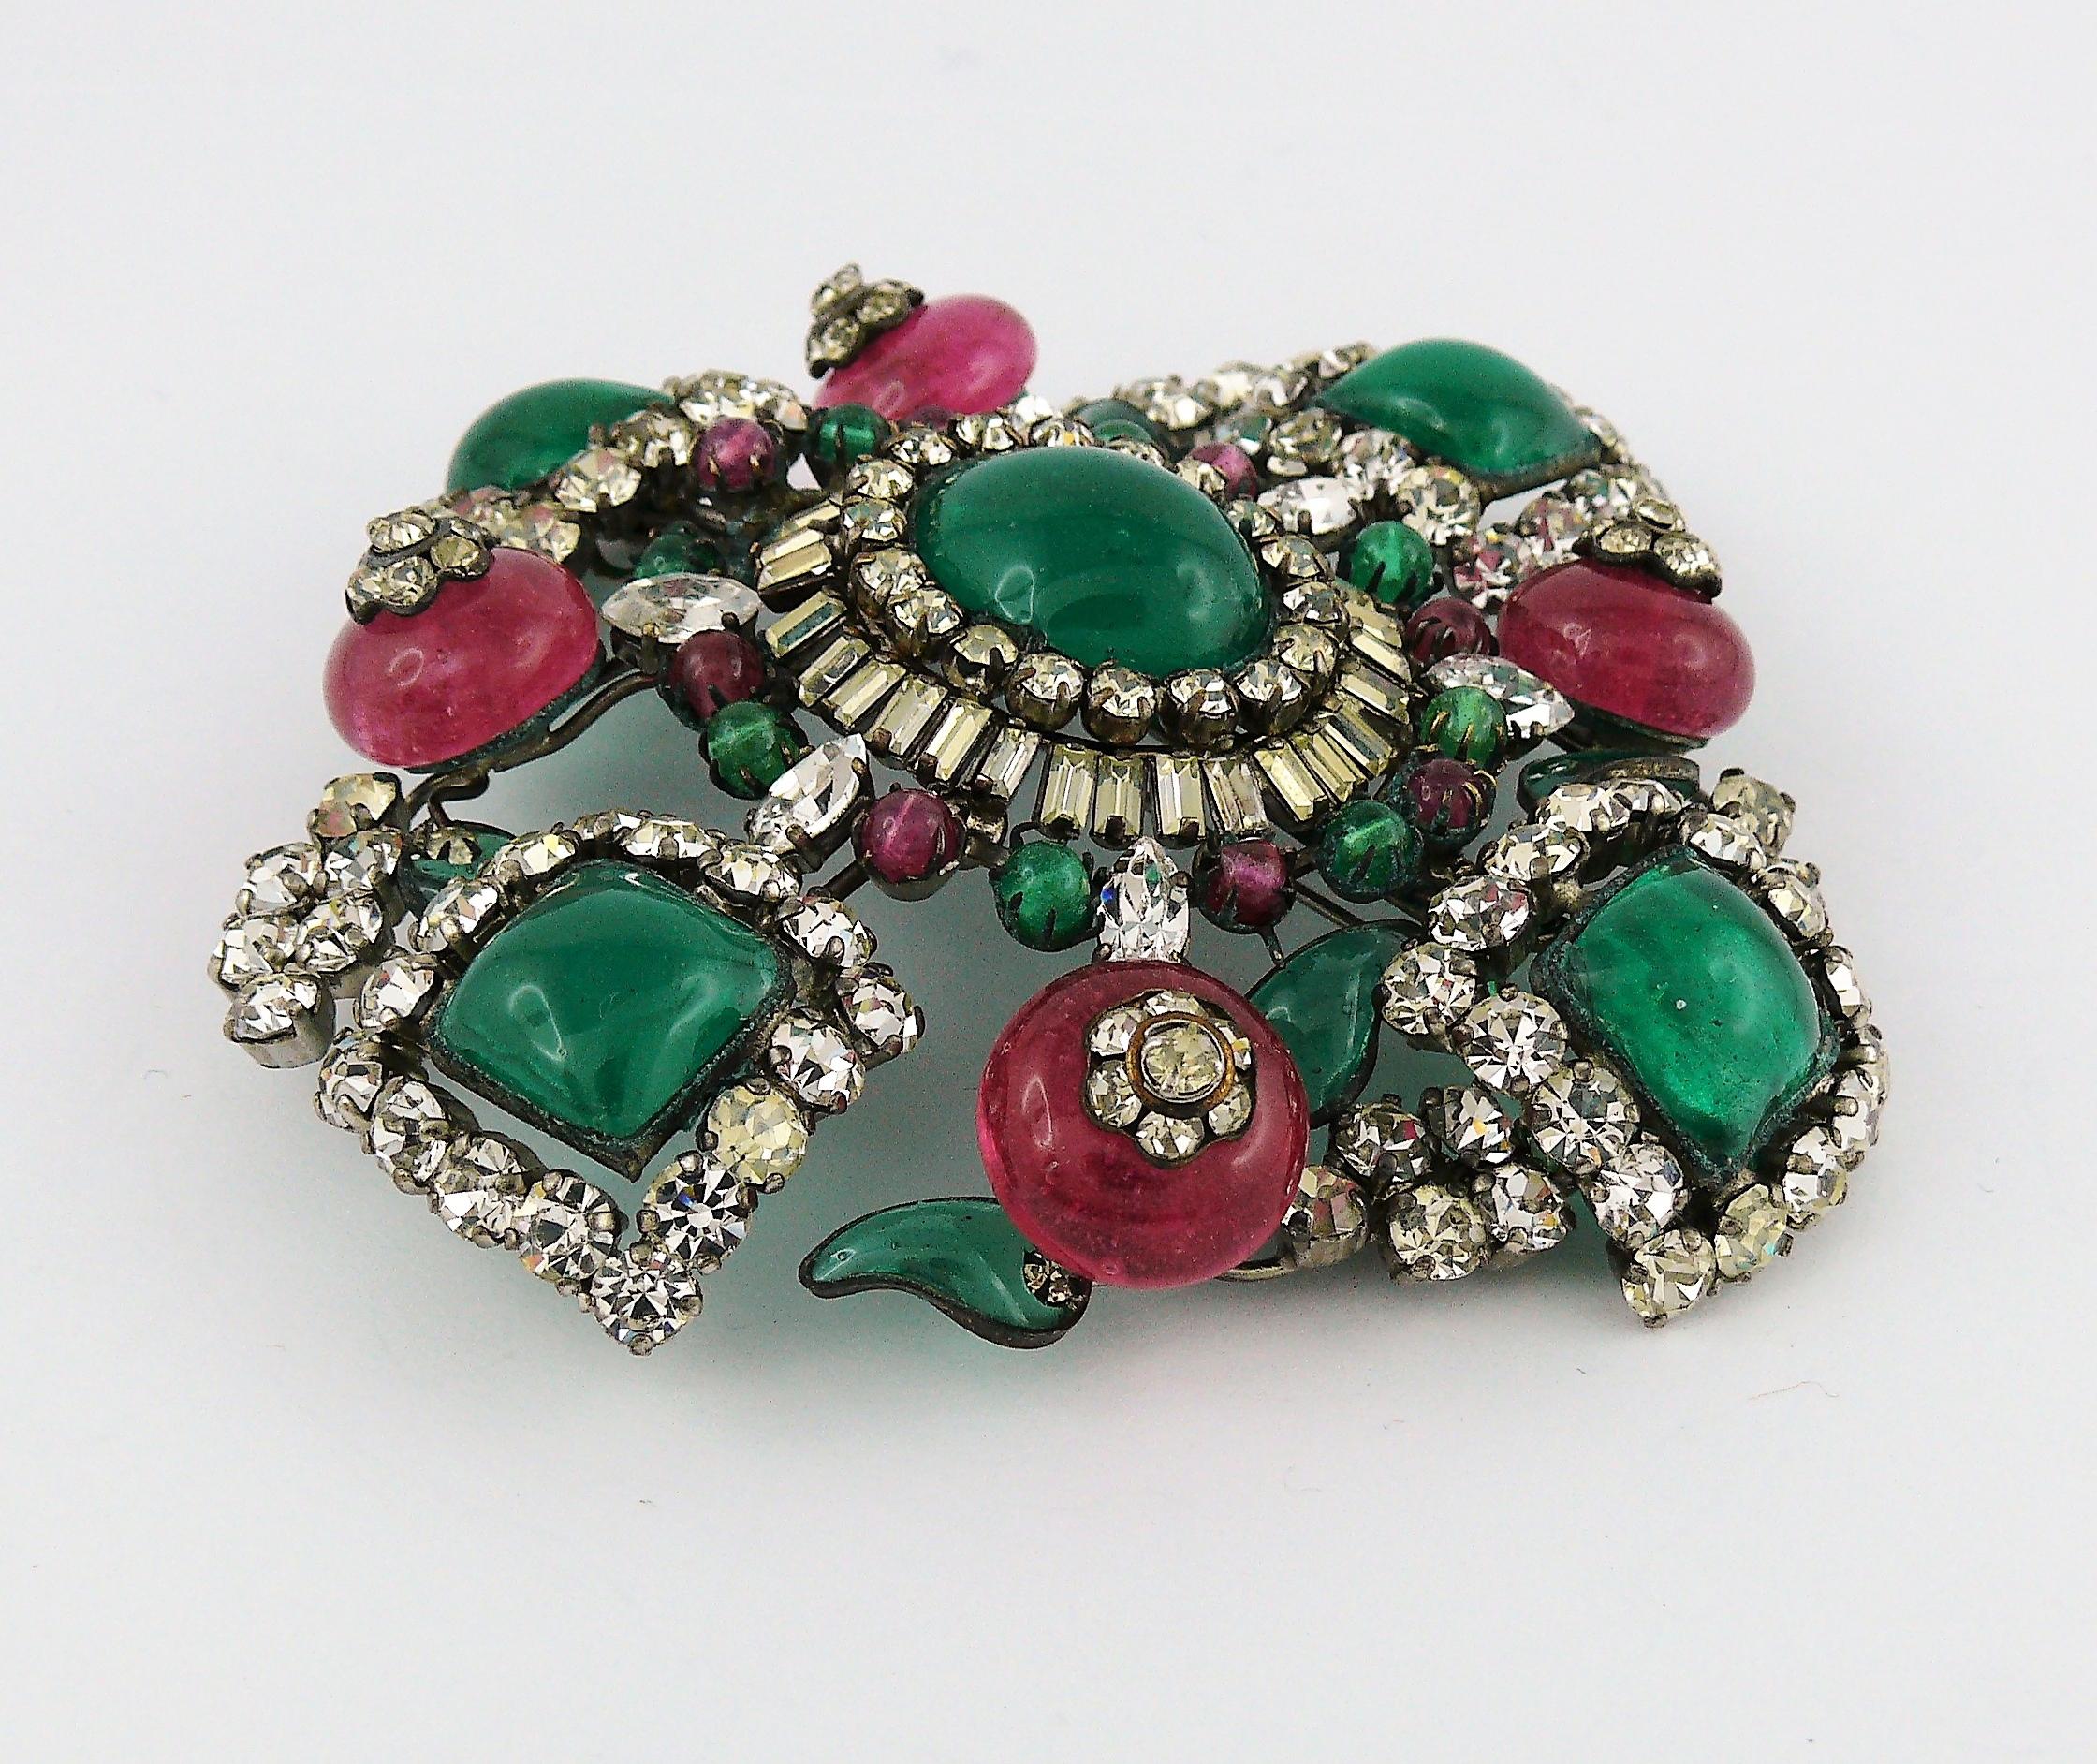 Magnificent Vintage Poured Glass Jewelled Massive Brooch Pendant  3